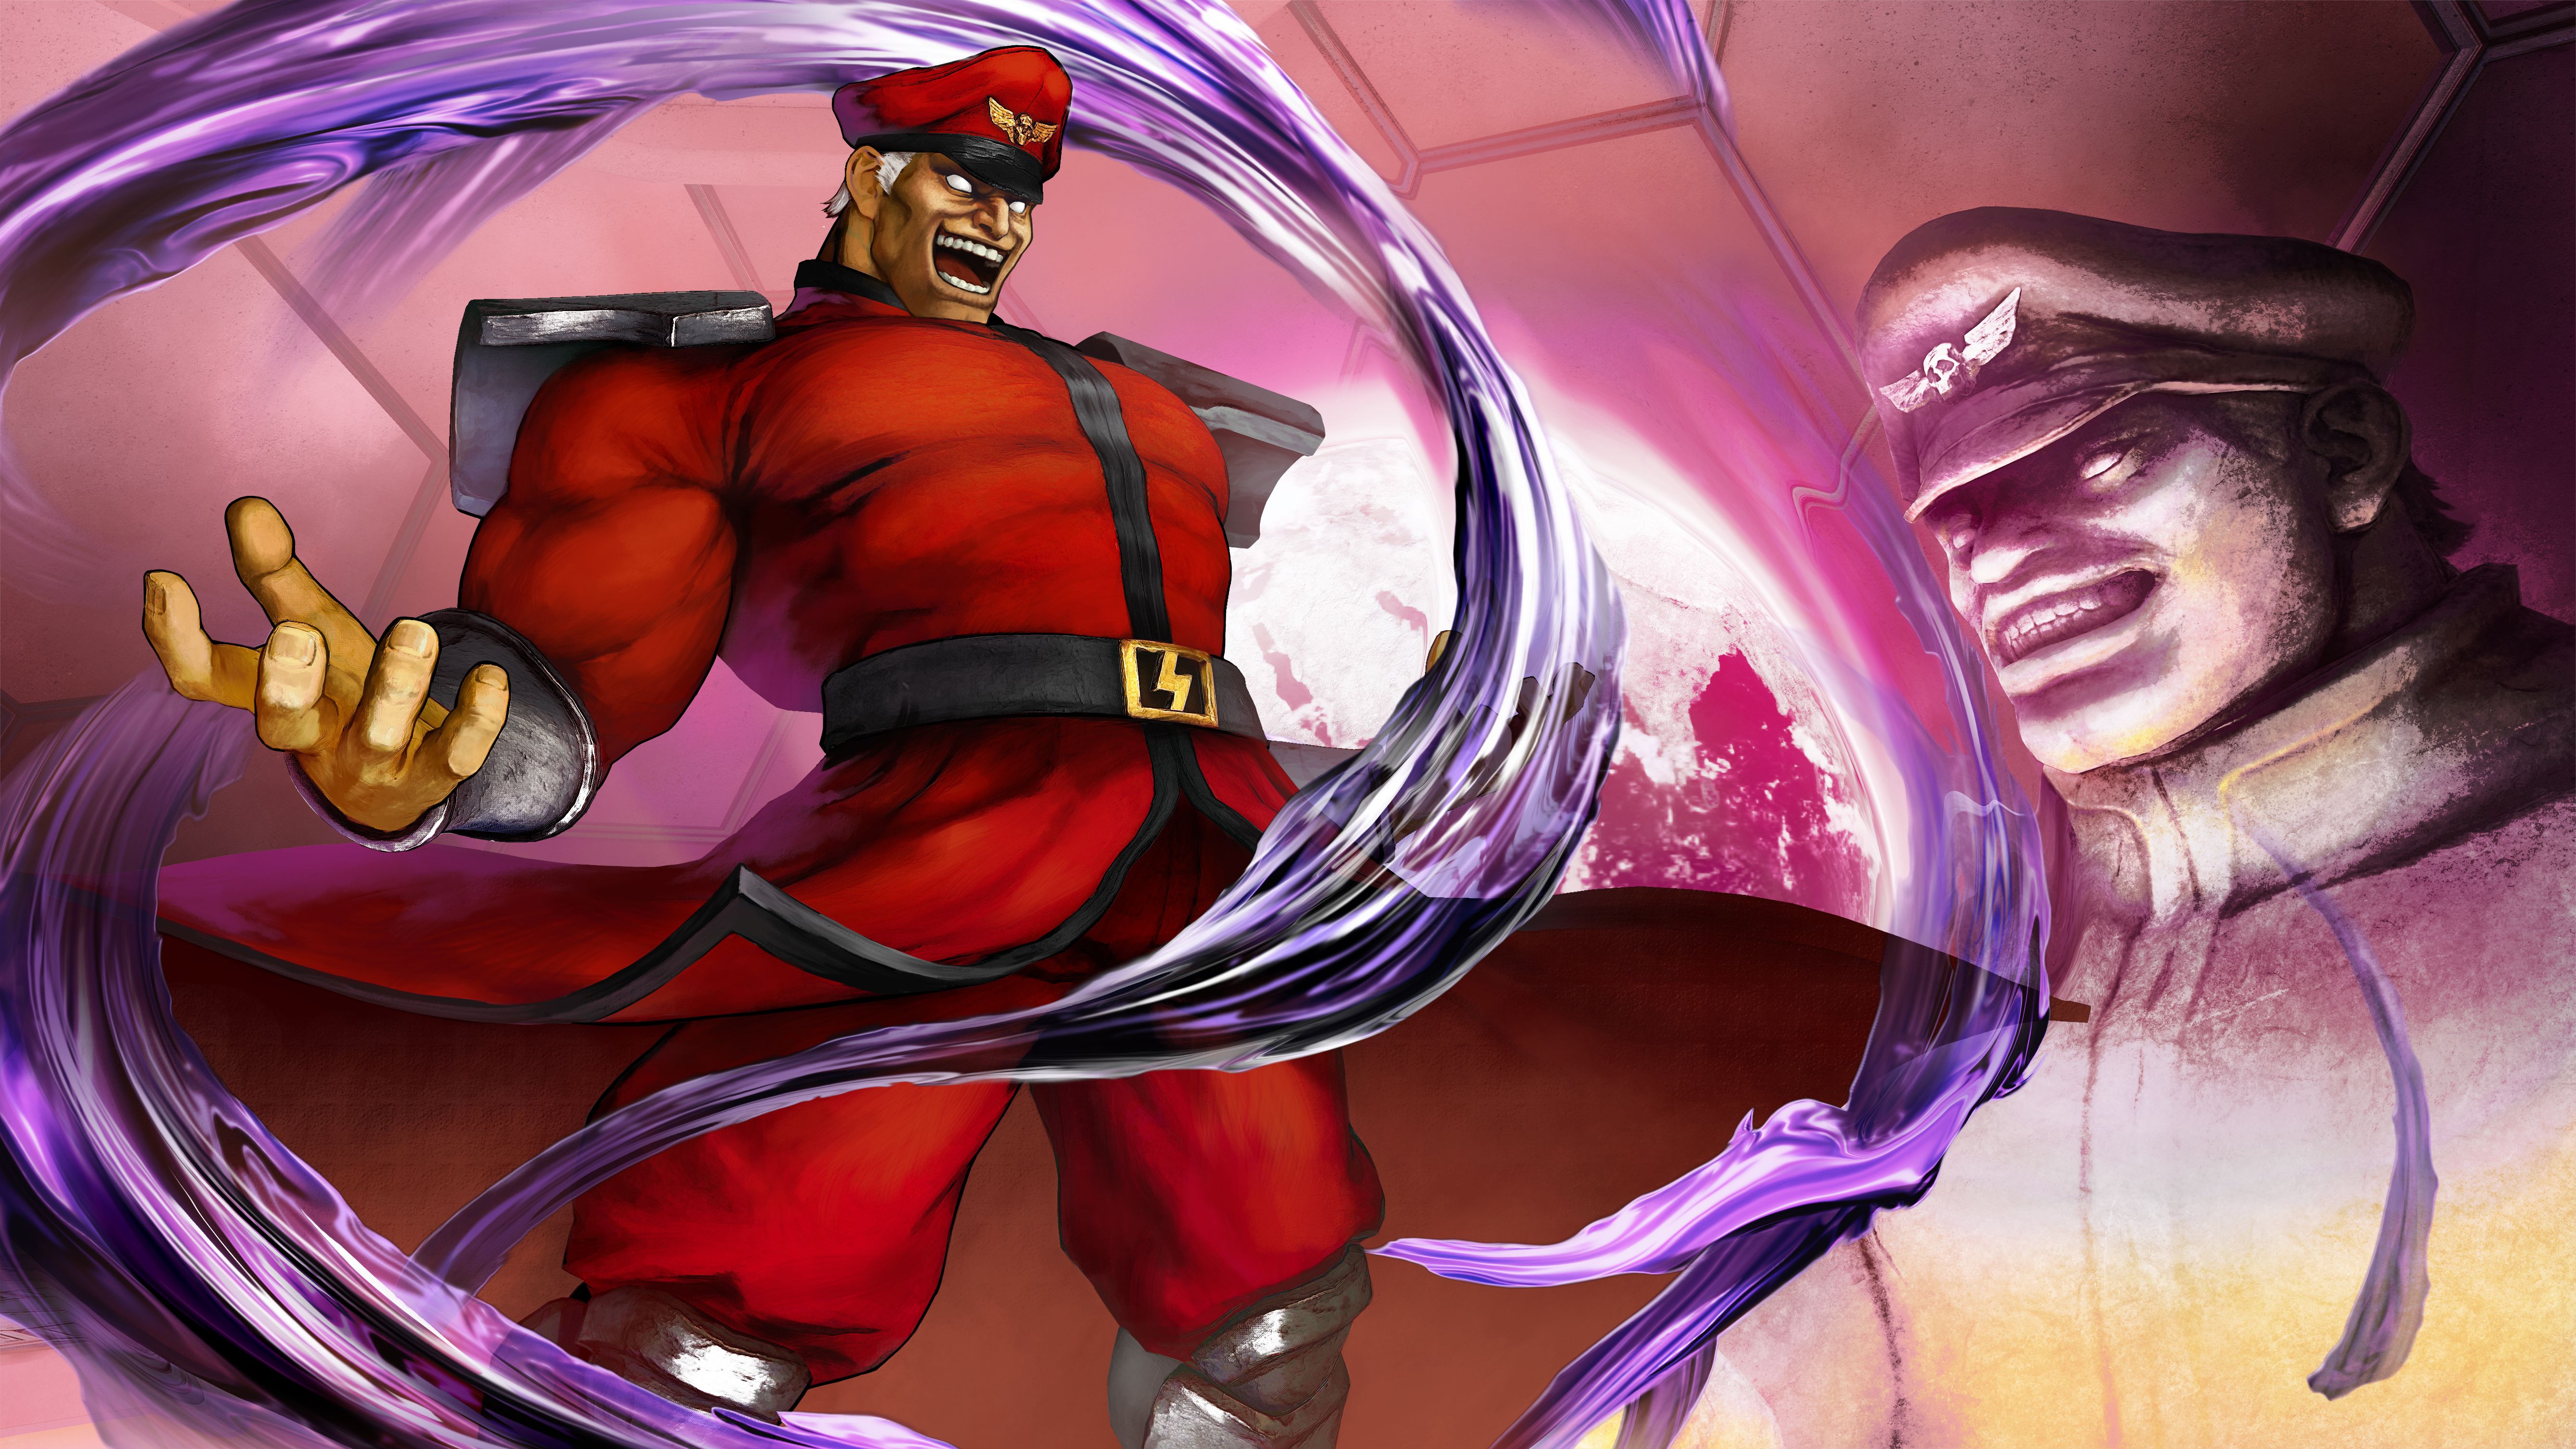 These Street Fighter 5 Wallpapers Will Make You 100 Cooler Than